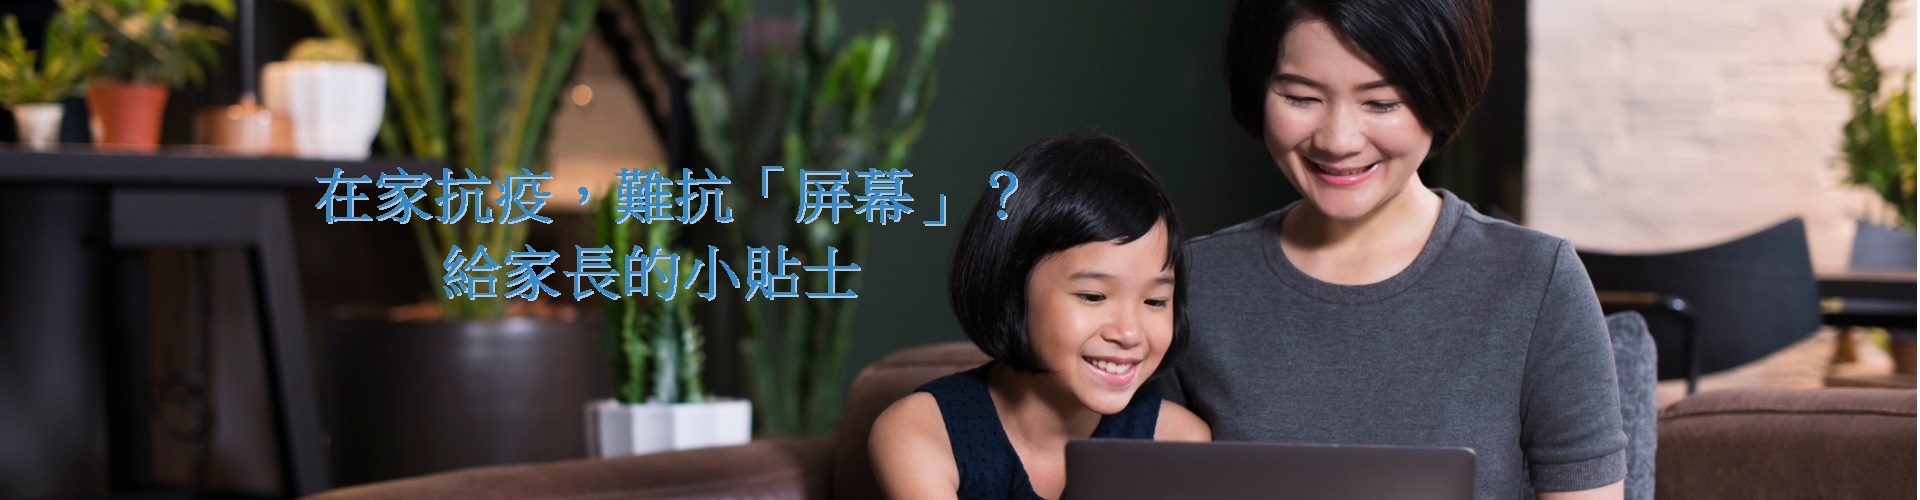 "Smart Parent Net" Recommendation:在家抗疫，難抗「屏幕」？給家長的小貼士(Chinese version only)